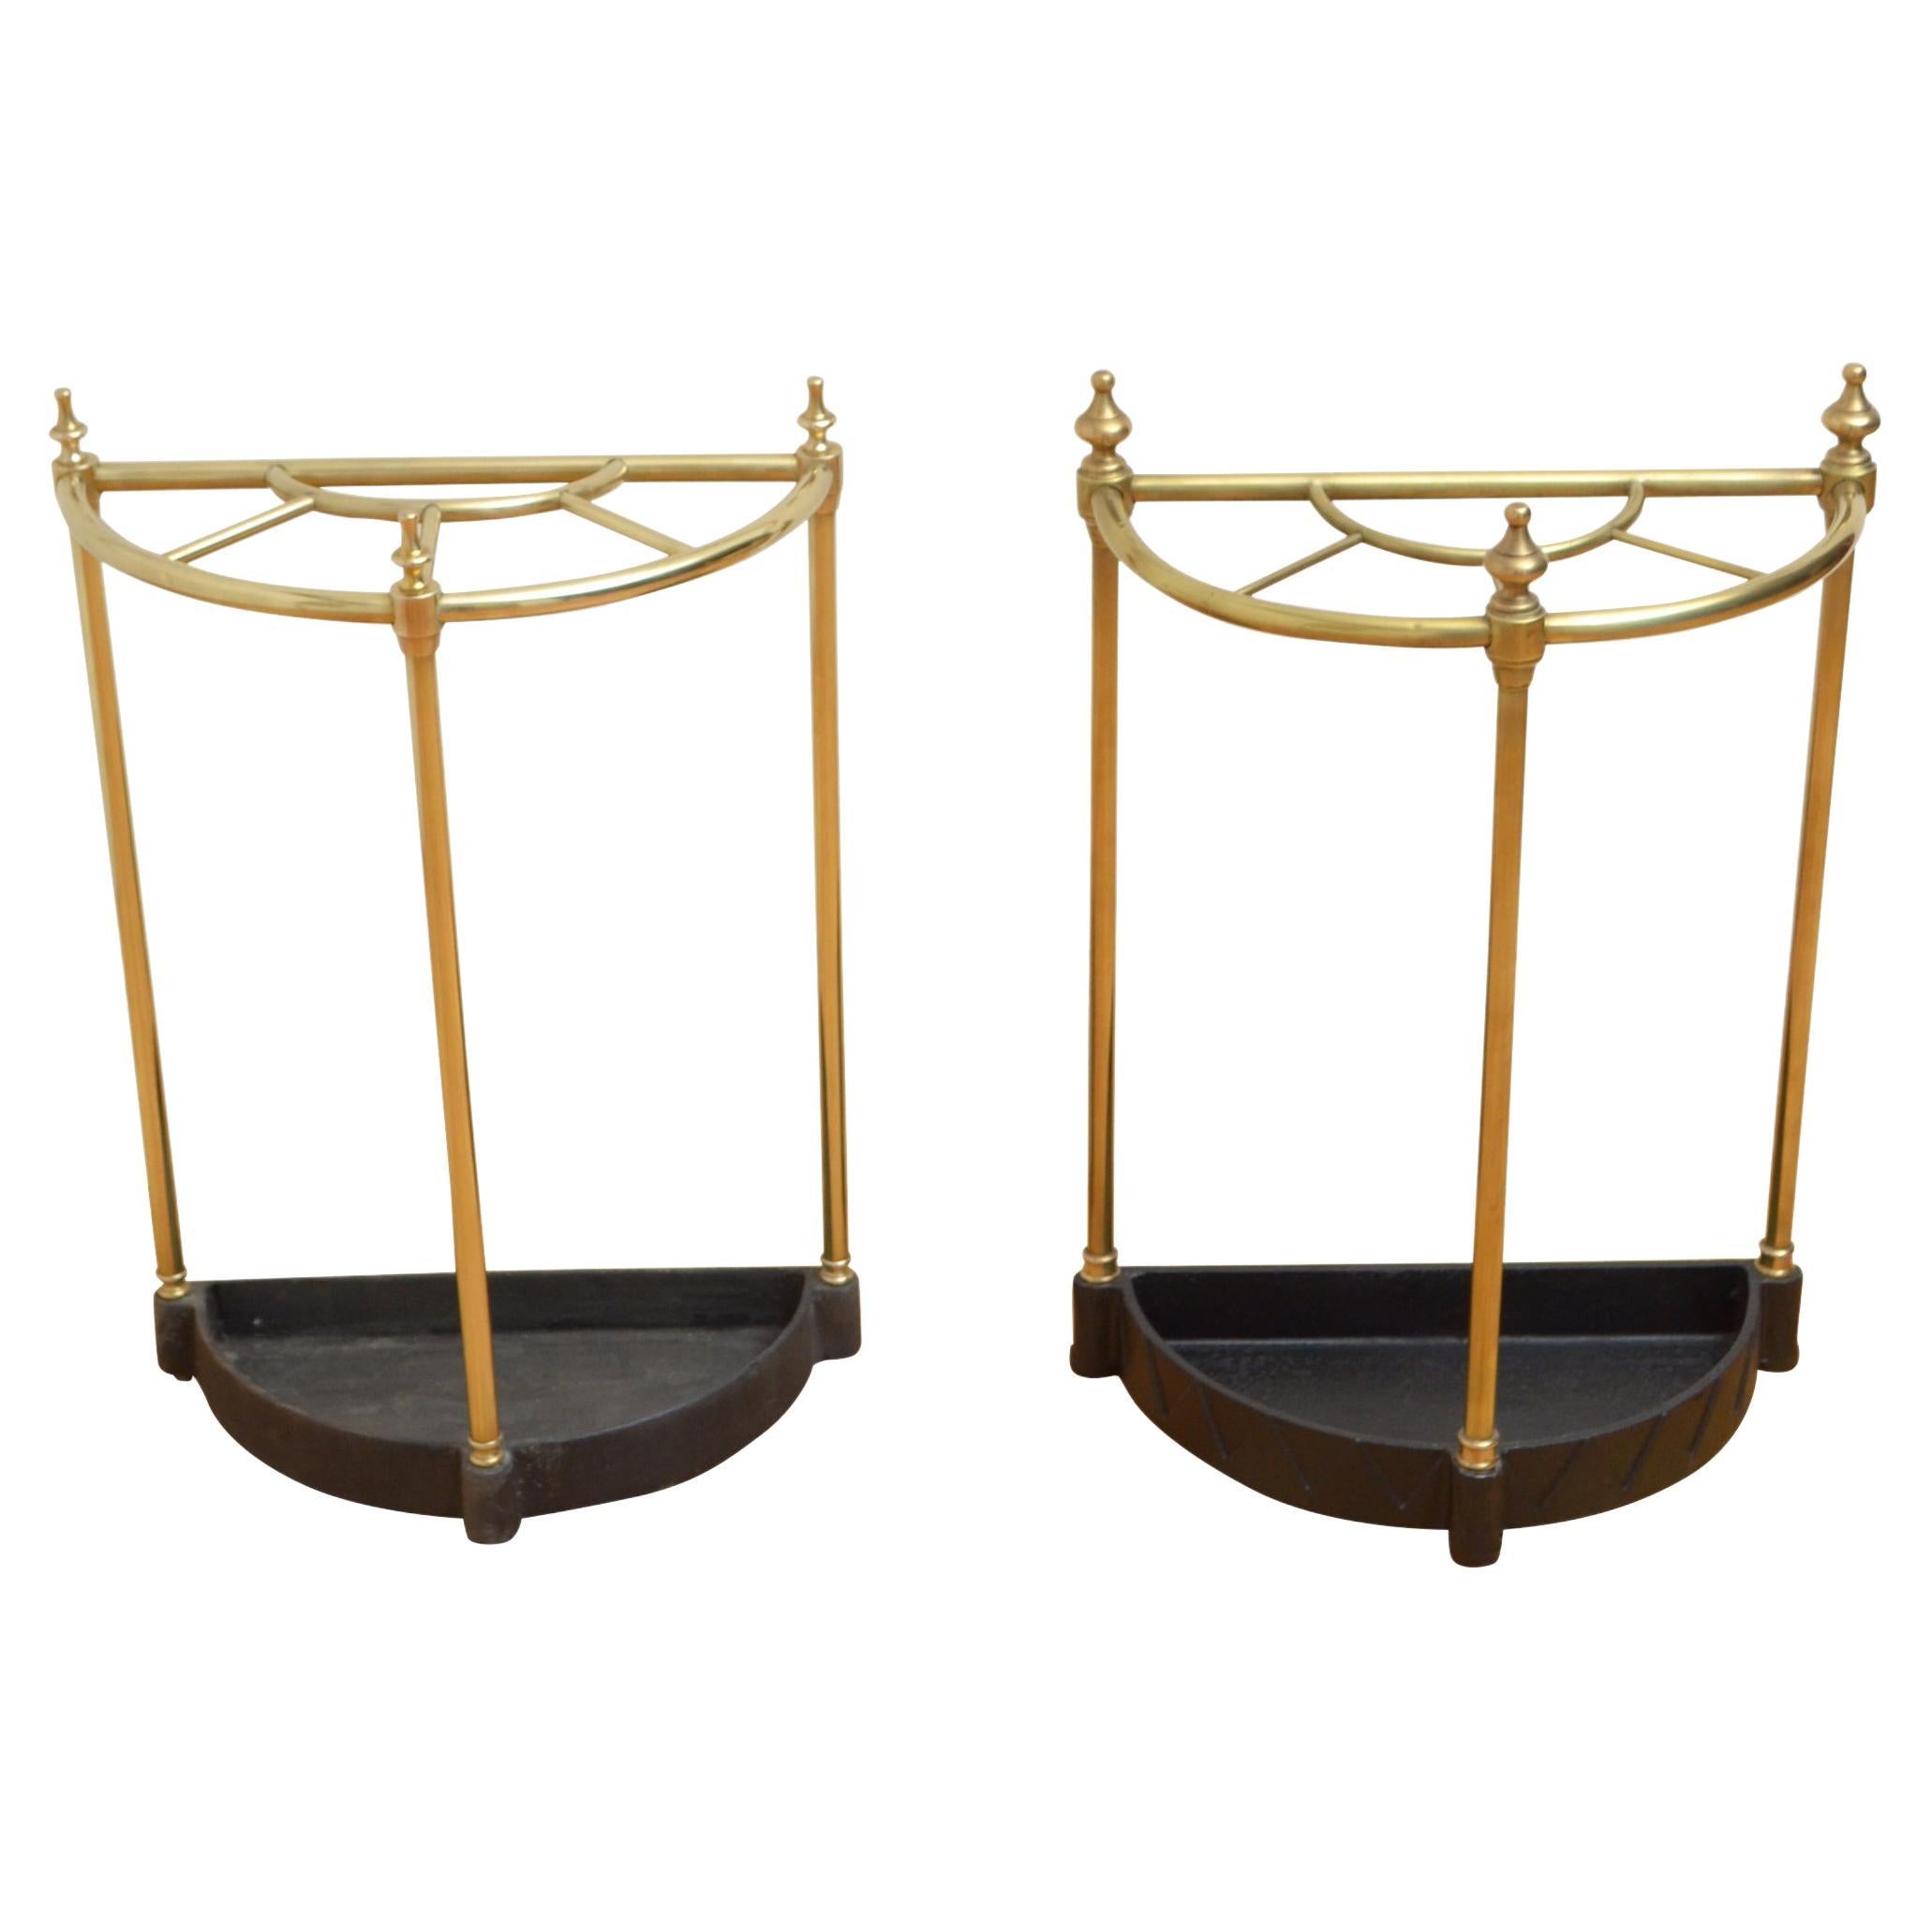 Matched Pair of Brass Umbrella Stands For Sale